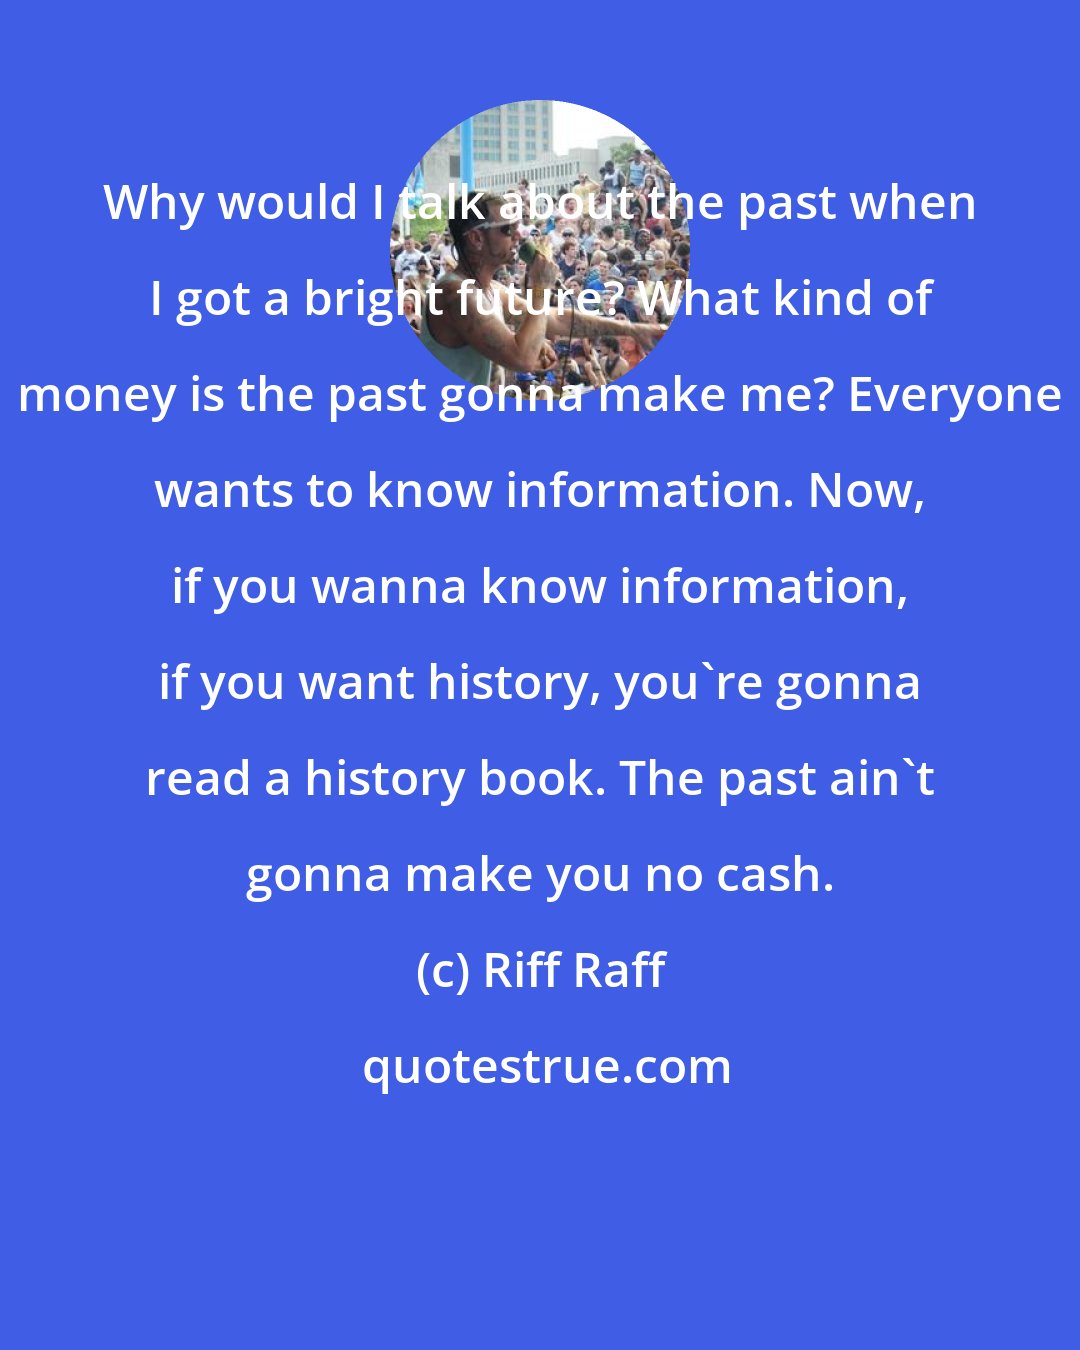 Riff Raff: Why would I talk about the past when I got a bright future? What kind of money is the past gonna make me? Everyone wants to know information. Now, if you wanna know information, if you want history, you're gonna read a history book. The past ain't gonna make you no cash.